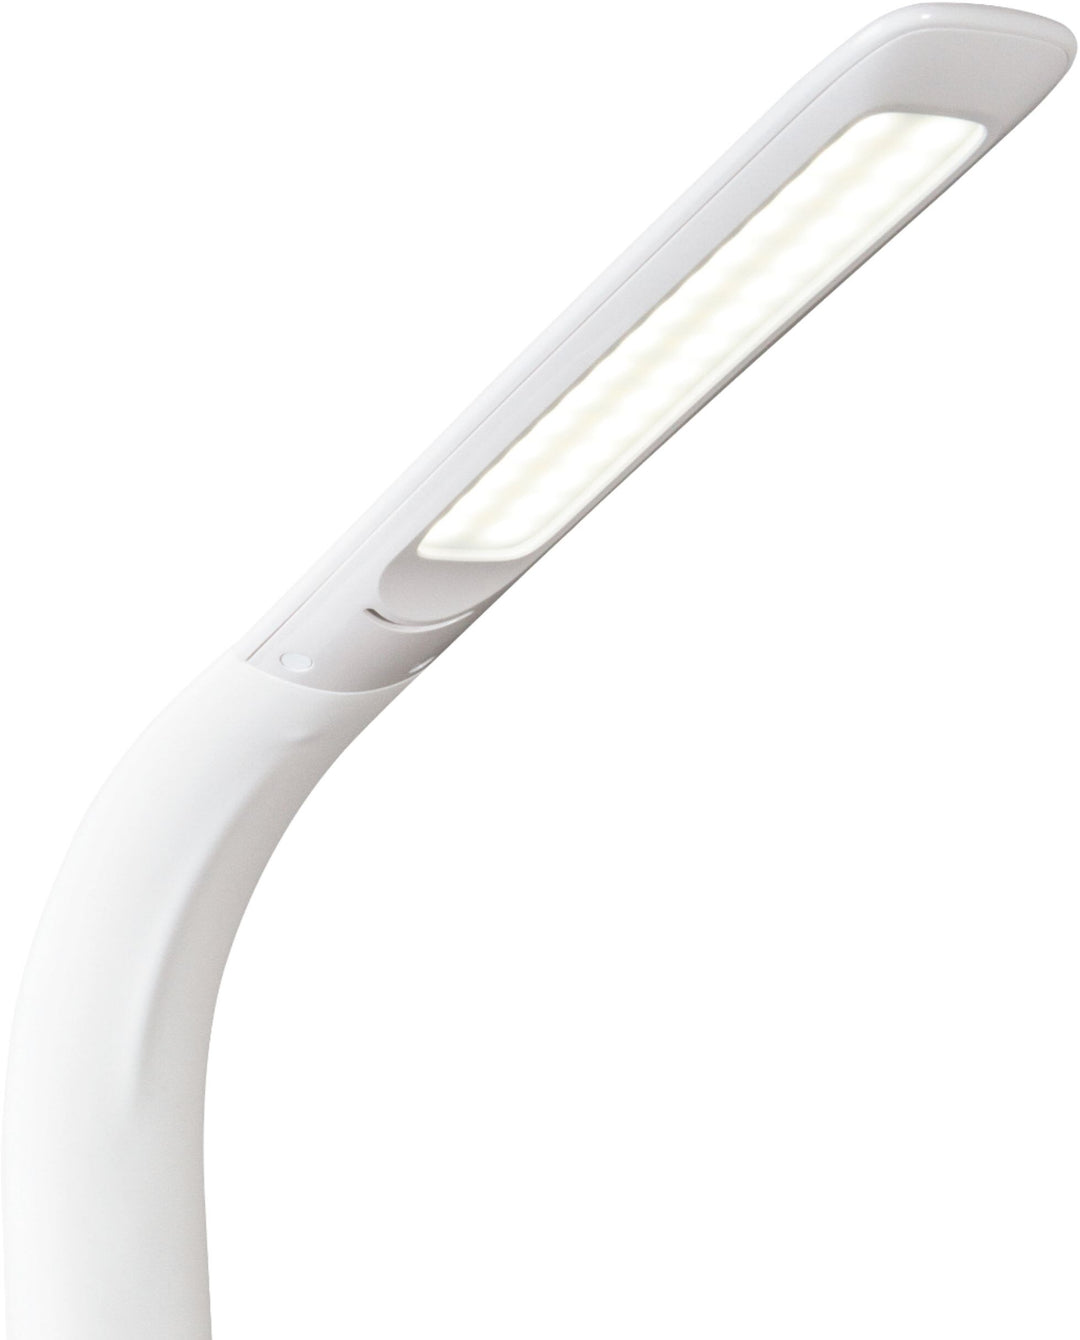 OttLite - Purify LED Sanitizing Desk Lamp with SpectraClean Disinfection, 3 Brightness Settings, Wireless Qi Charging, & USB Port - White_8